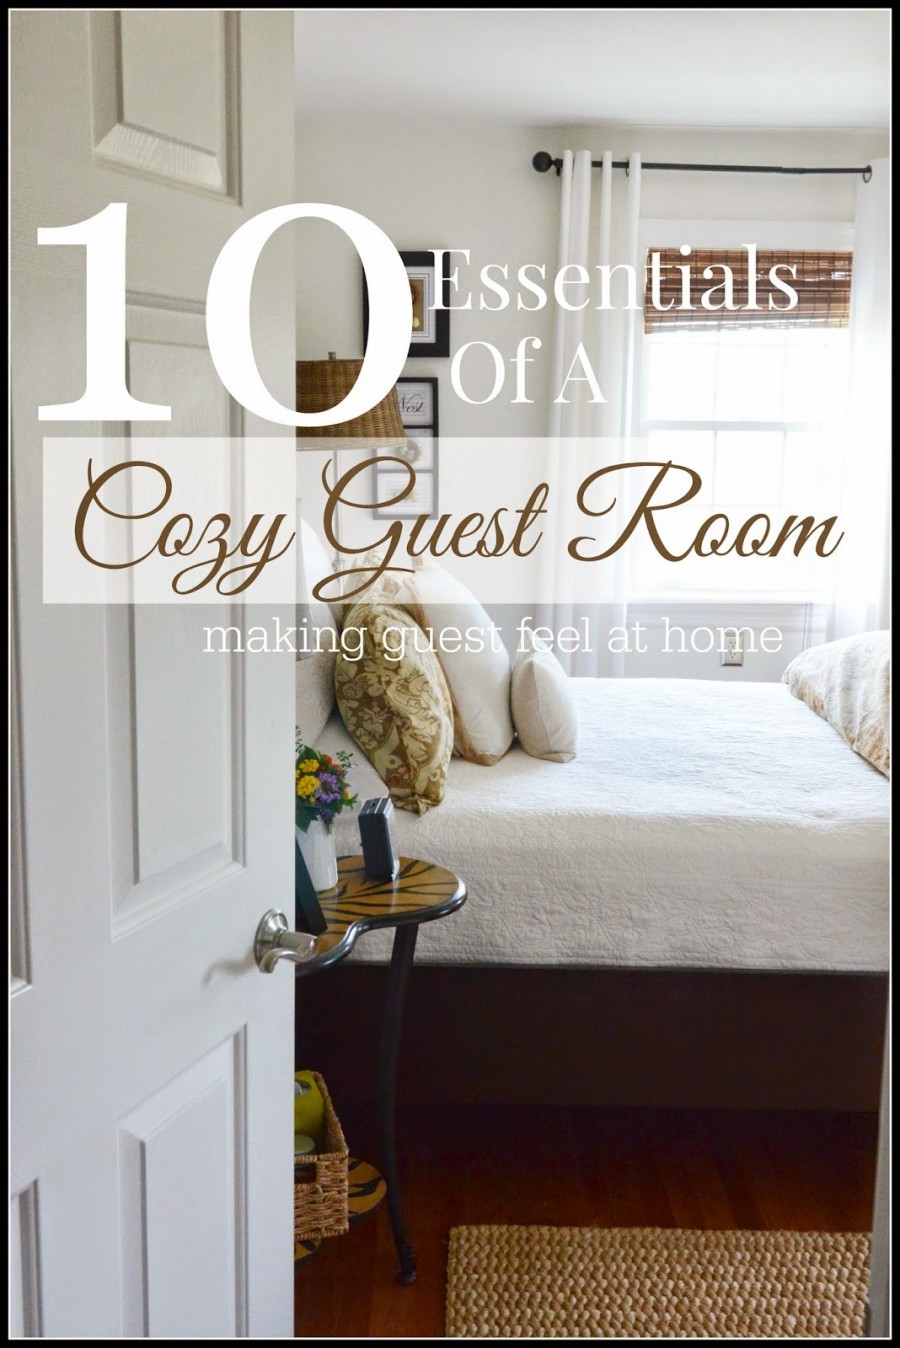 10 ESSENTIALS OF A COZY GUEST ROOM